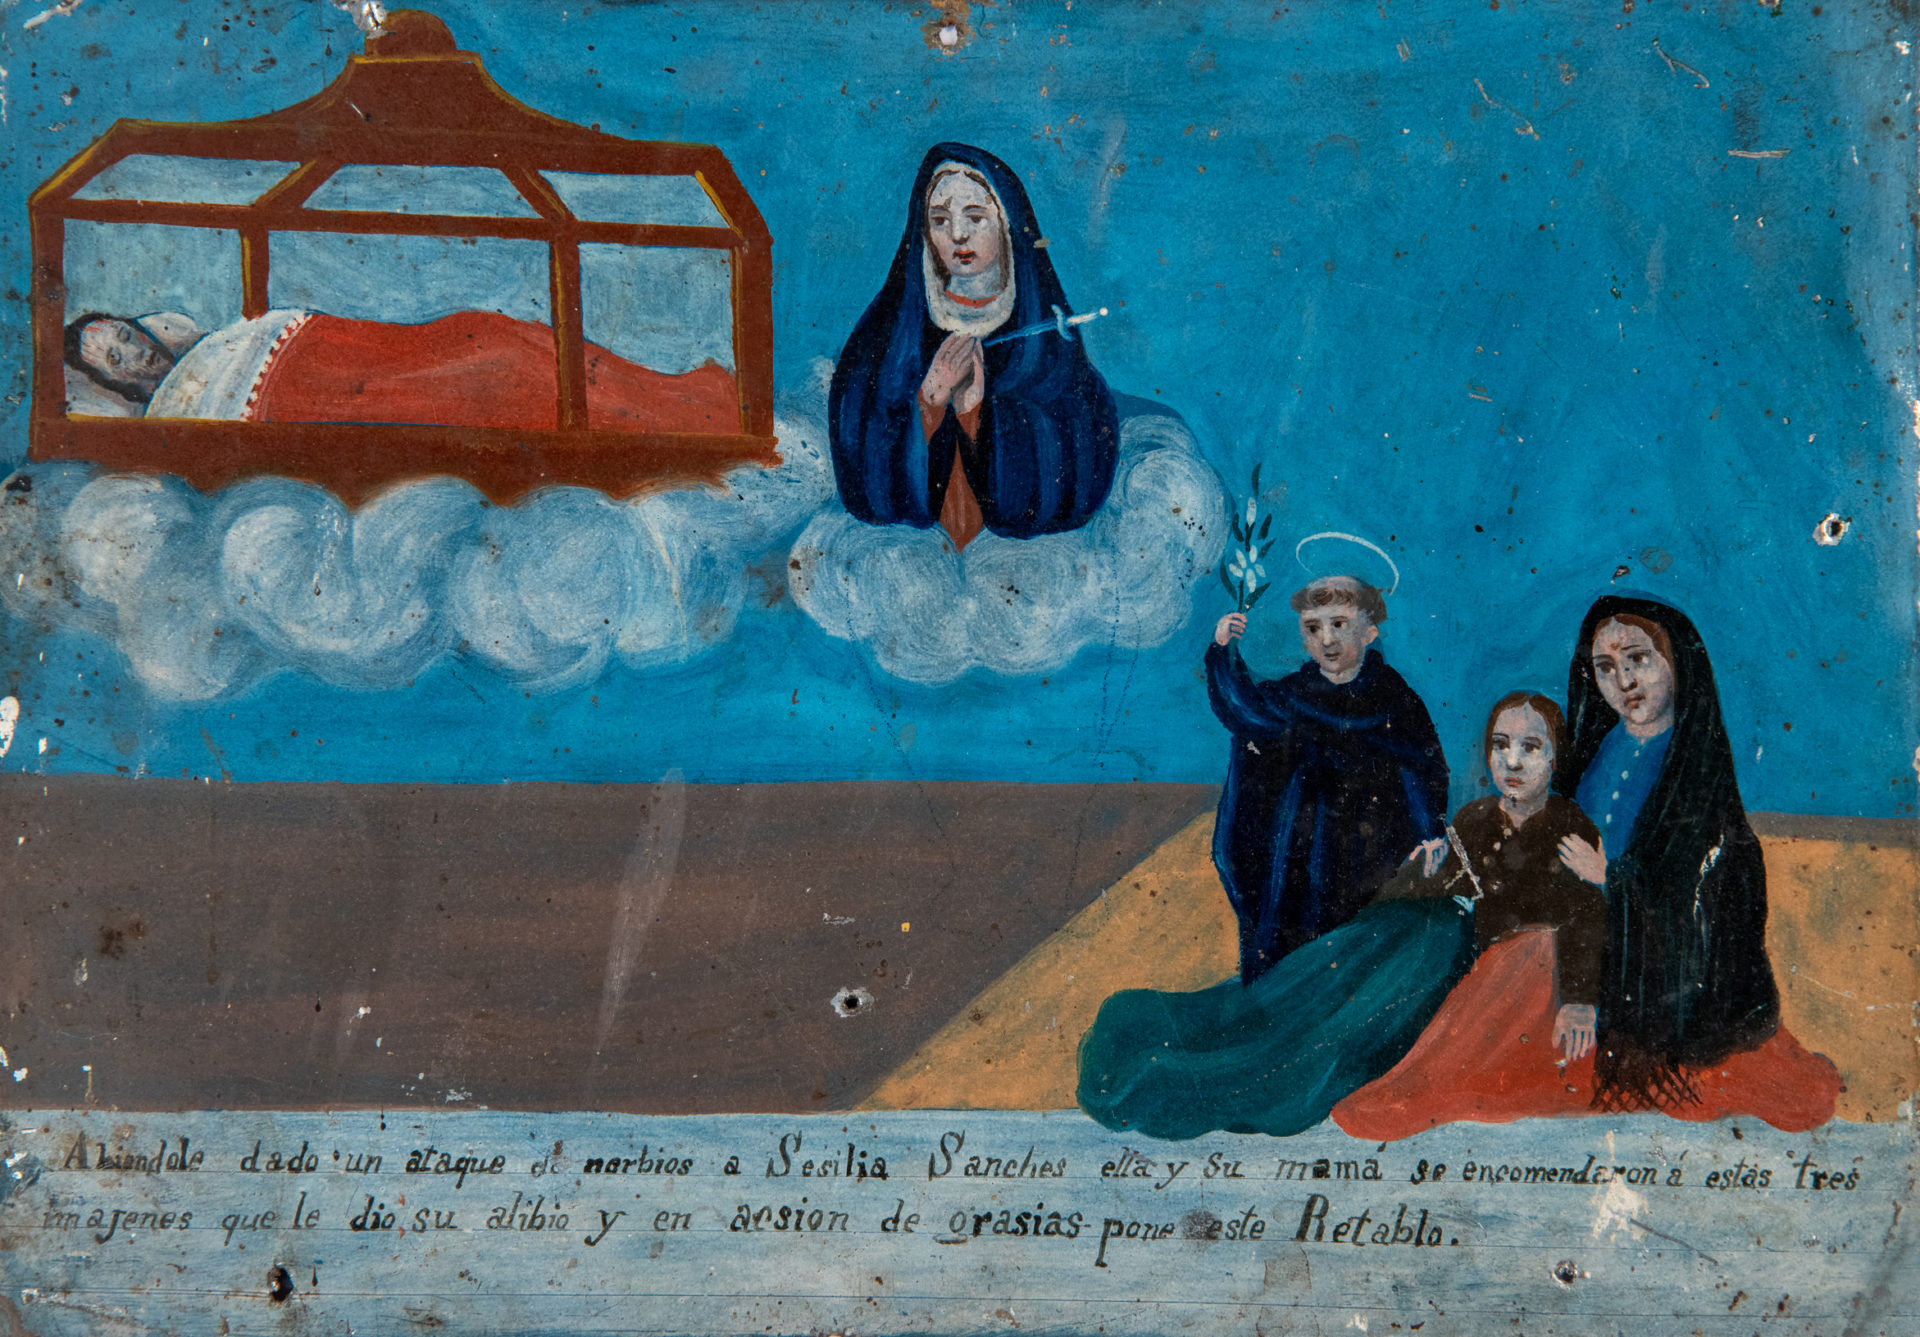 “Icons & Retablos: Images of Devotion” at the Museum of Russian Icons